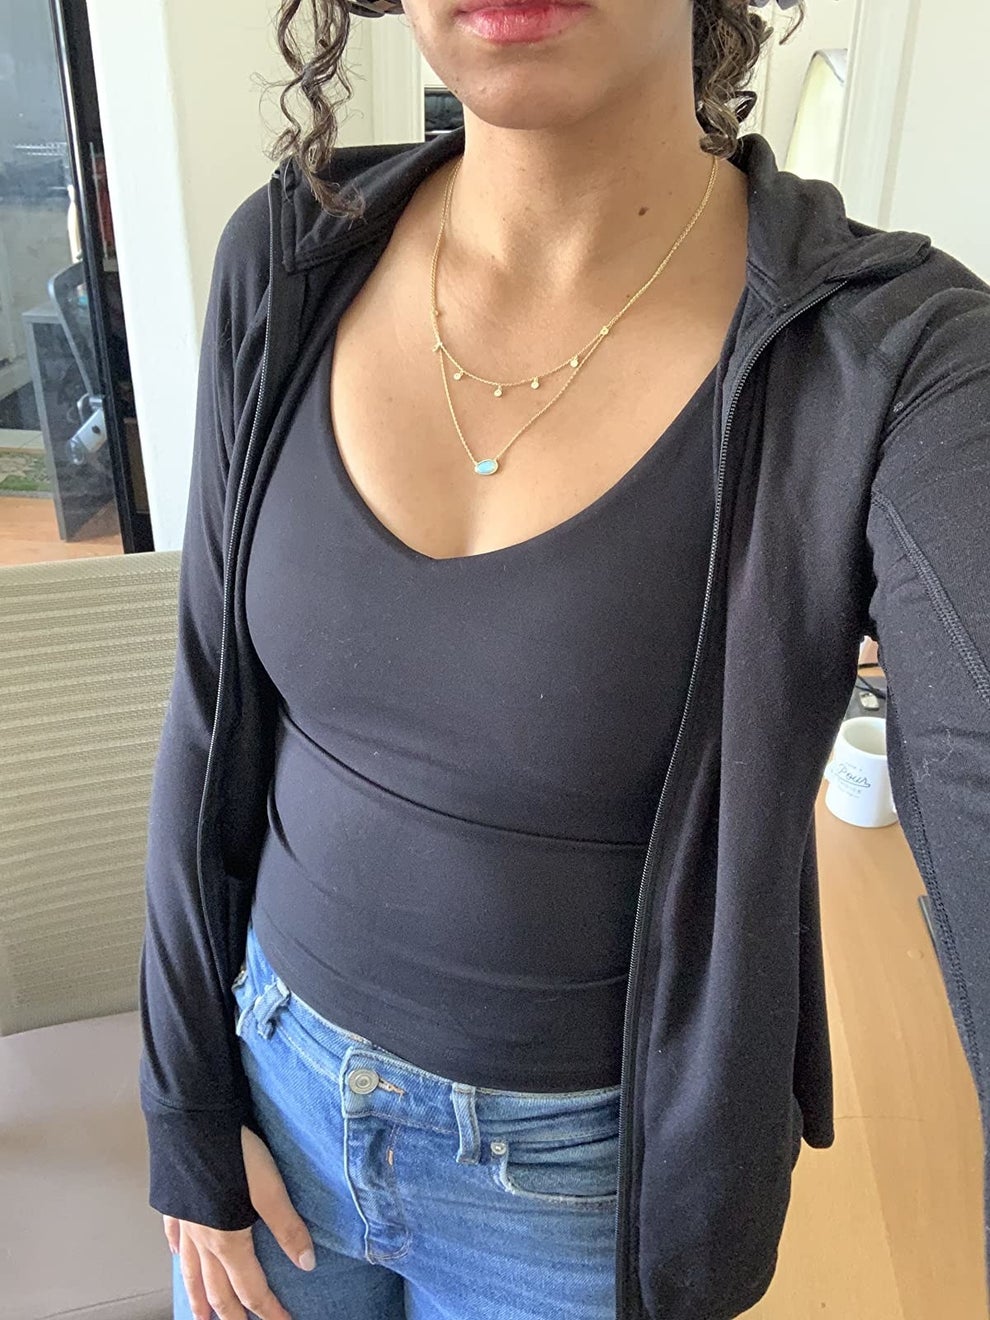 black crop tank top with dark jeans  Girly outfits, Fashion, Black crop  top tank